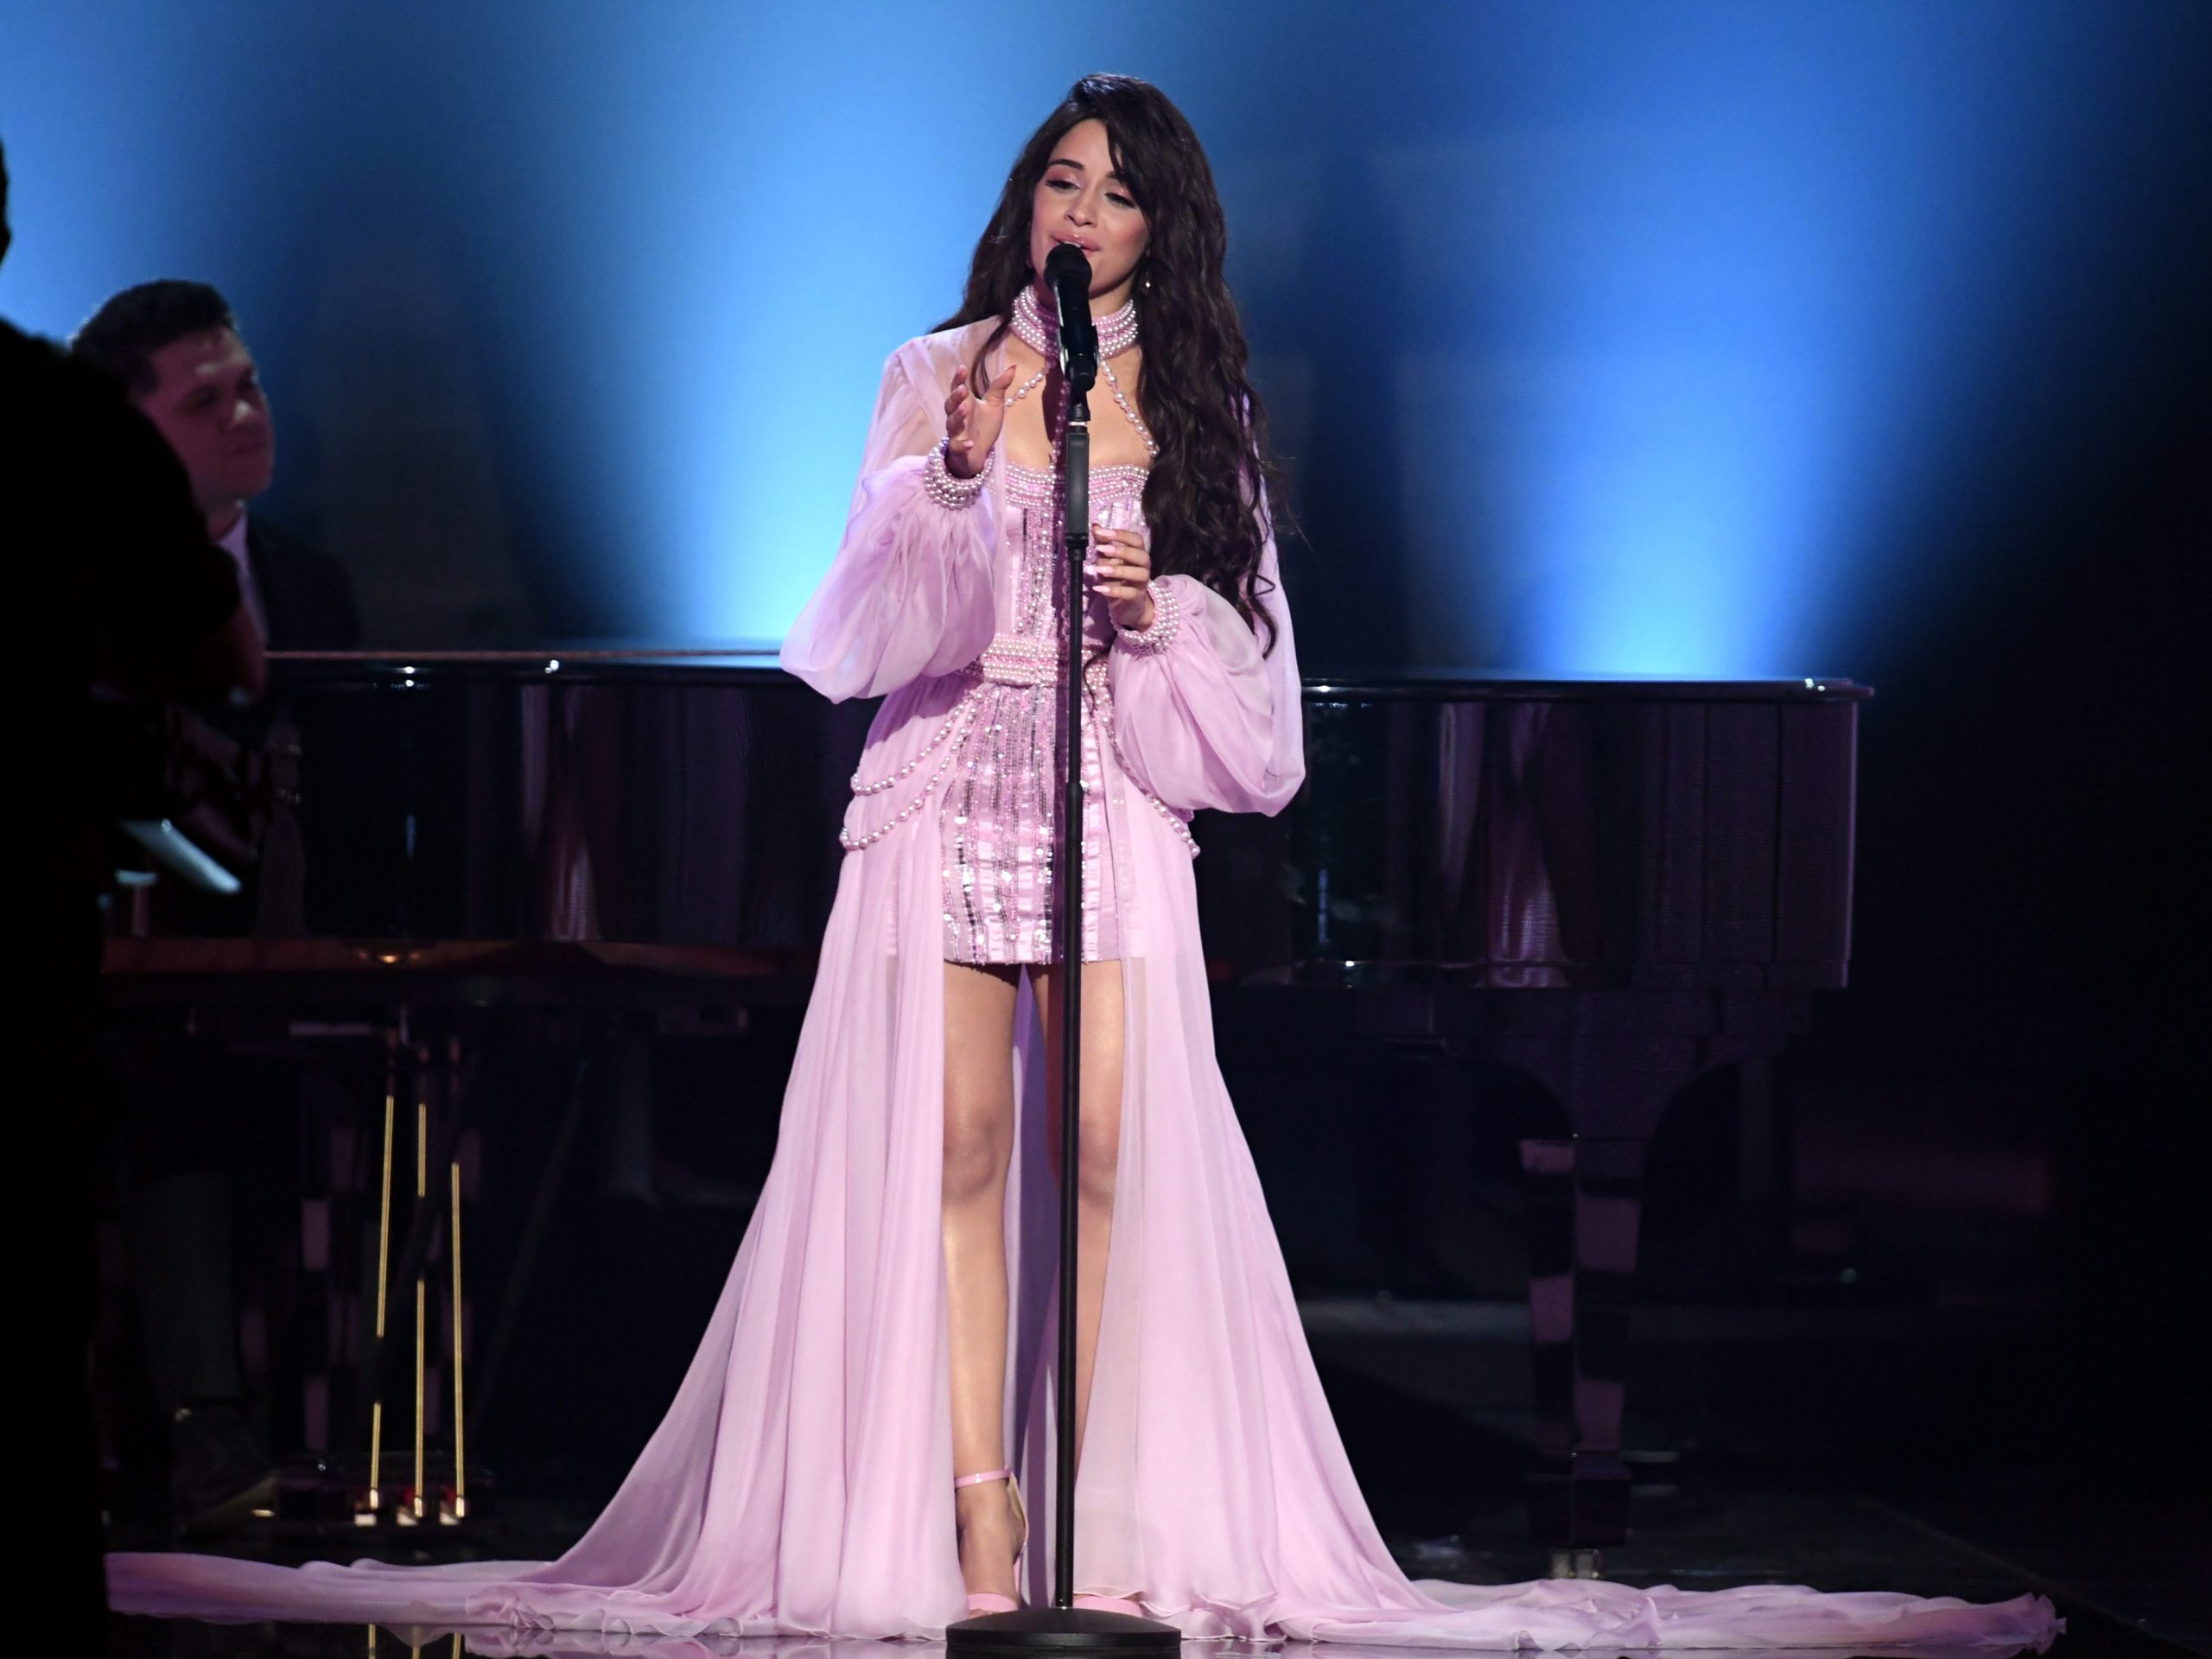 Camila Cabello wears a pink dress while performing at the Grammys.